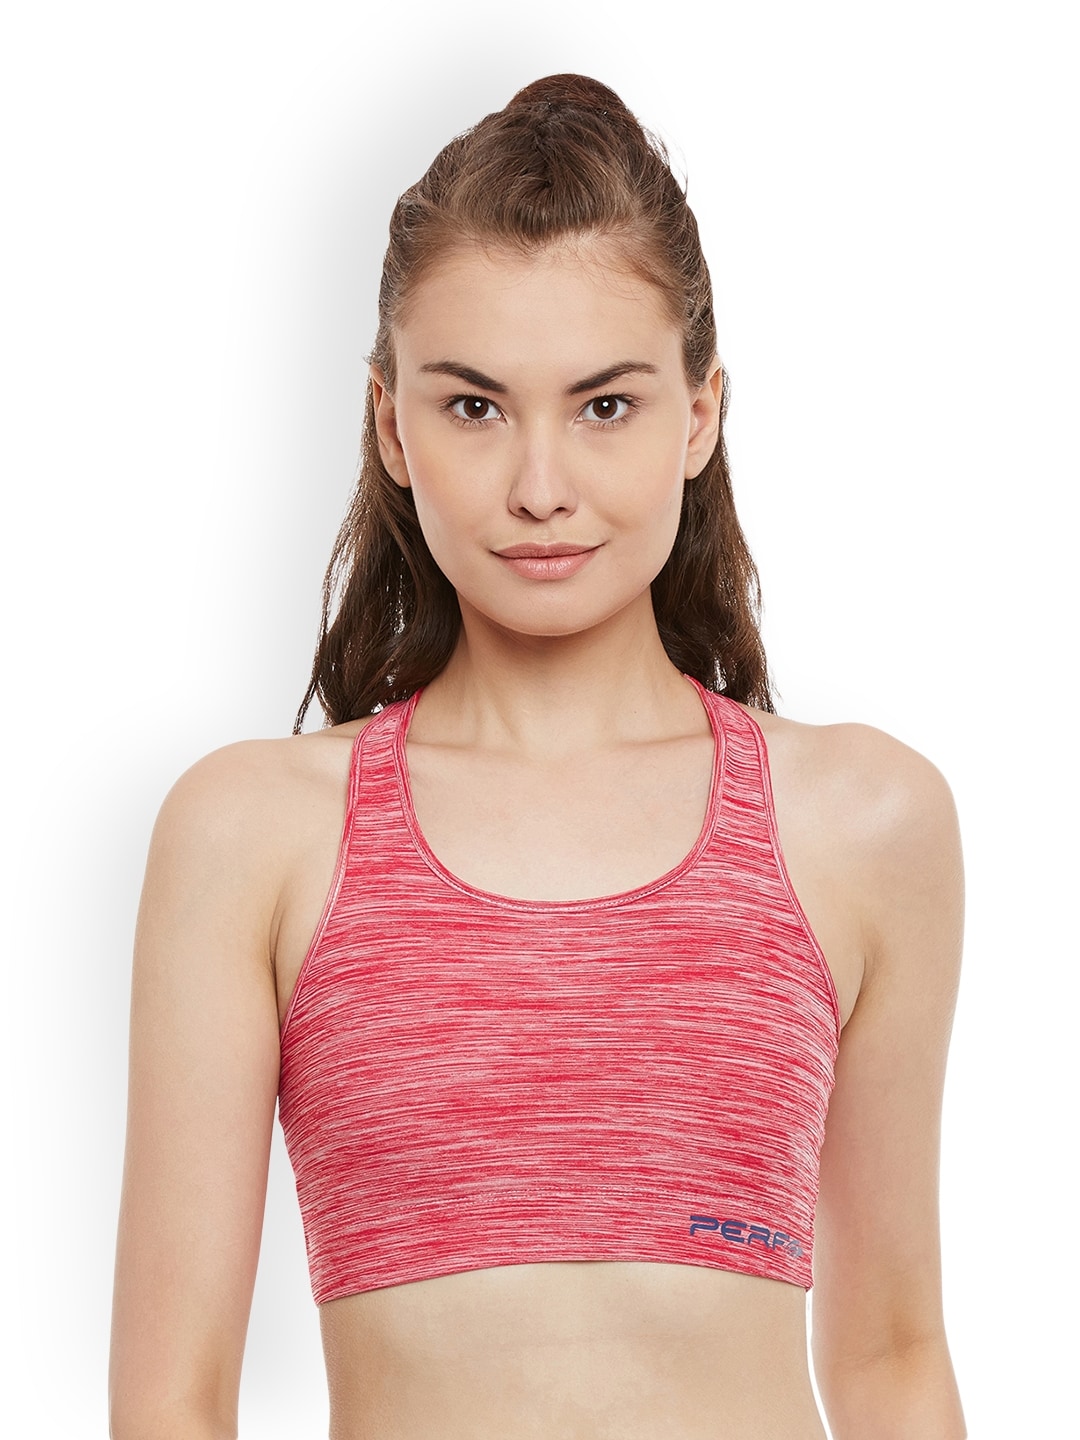 PERF Red Self-Design Non-Wired Lightly Padded Sports Bra RKTNMBR Price in India